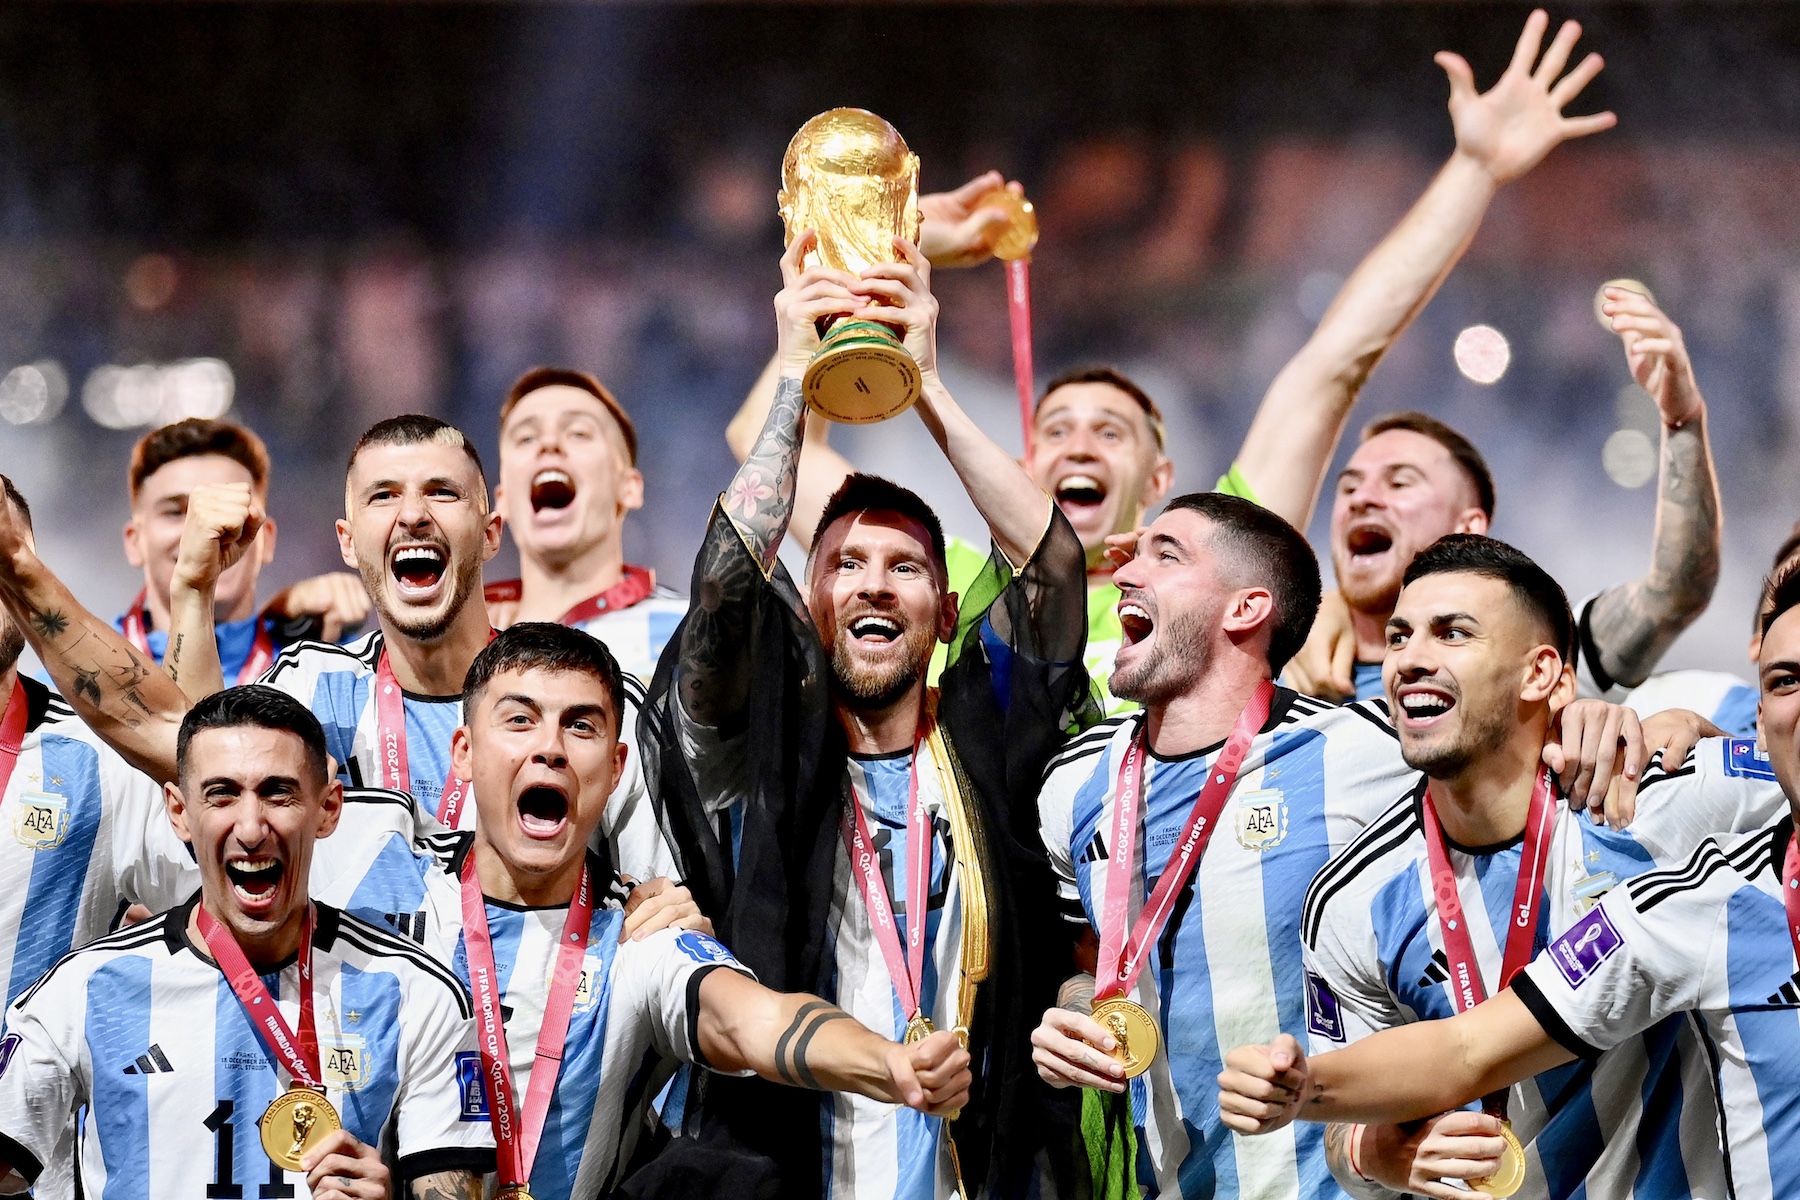 In One Of The Most Dramatic Finals, Argentina Beat France 4-2 In A Shootout To Win The World Cup